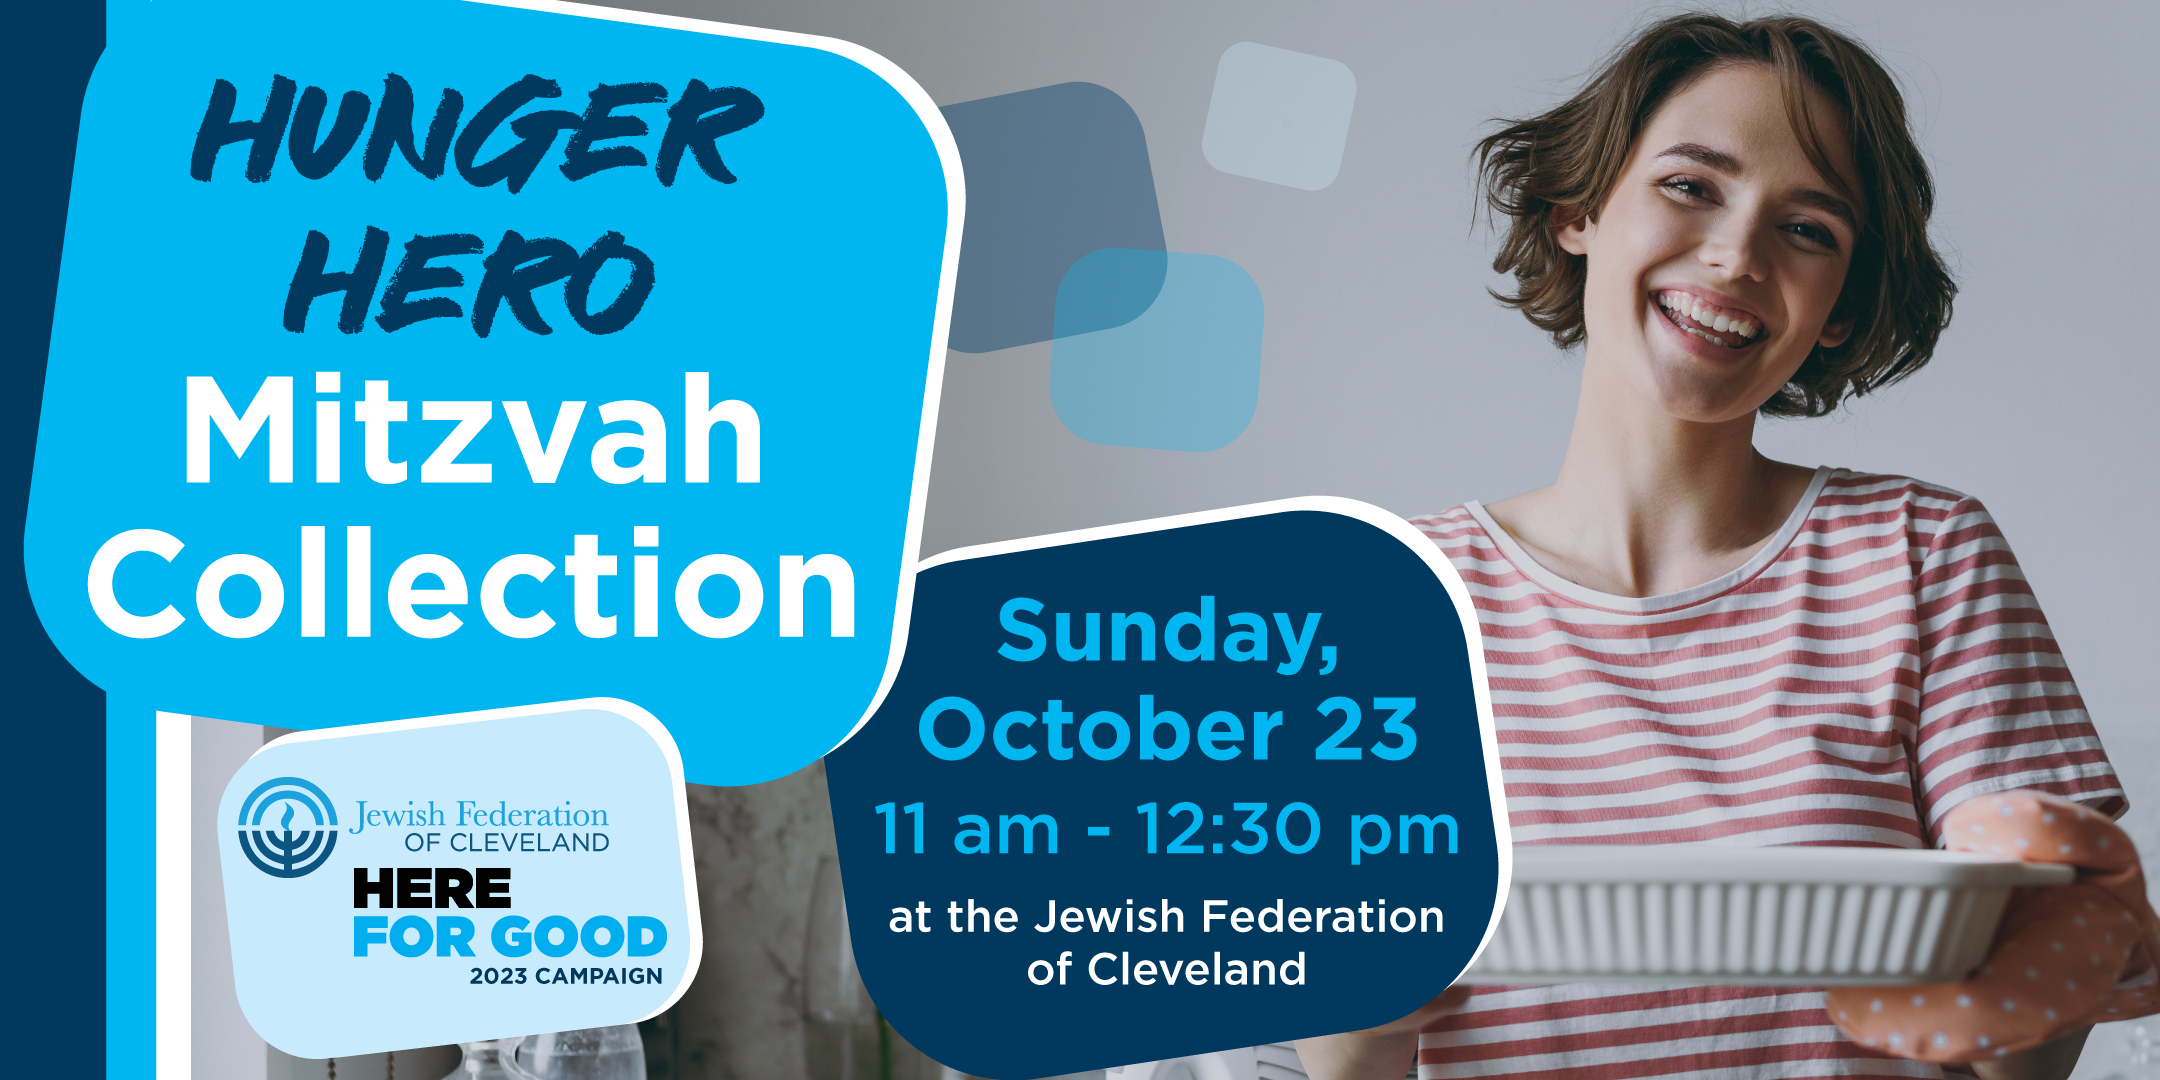 Hunger Hero Mitzvah Collection - October 2022